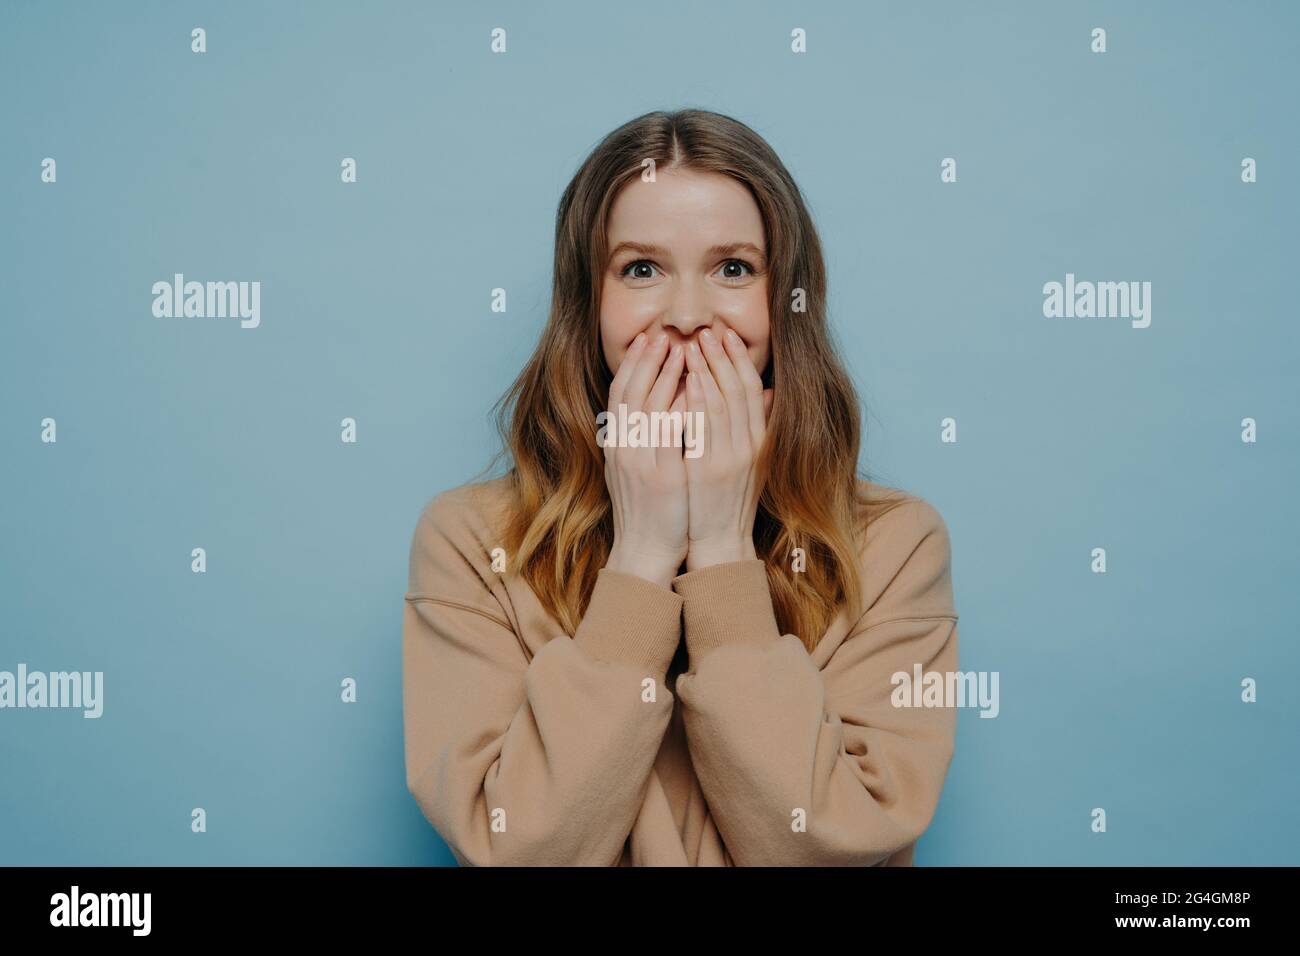 Young surprised teen girl in casual wear on blue background Stock Photo